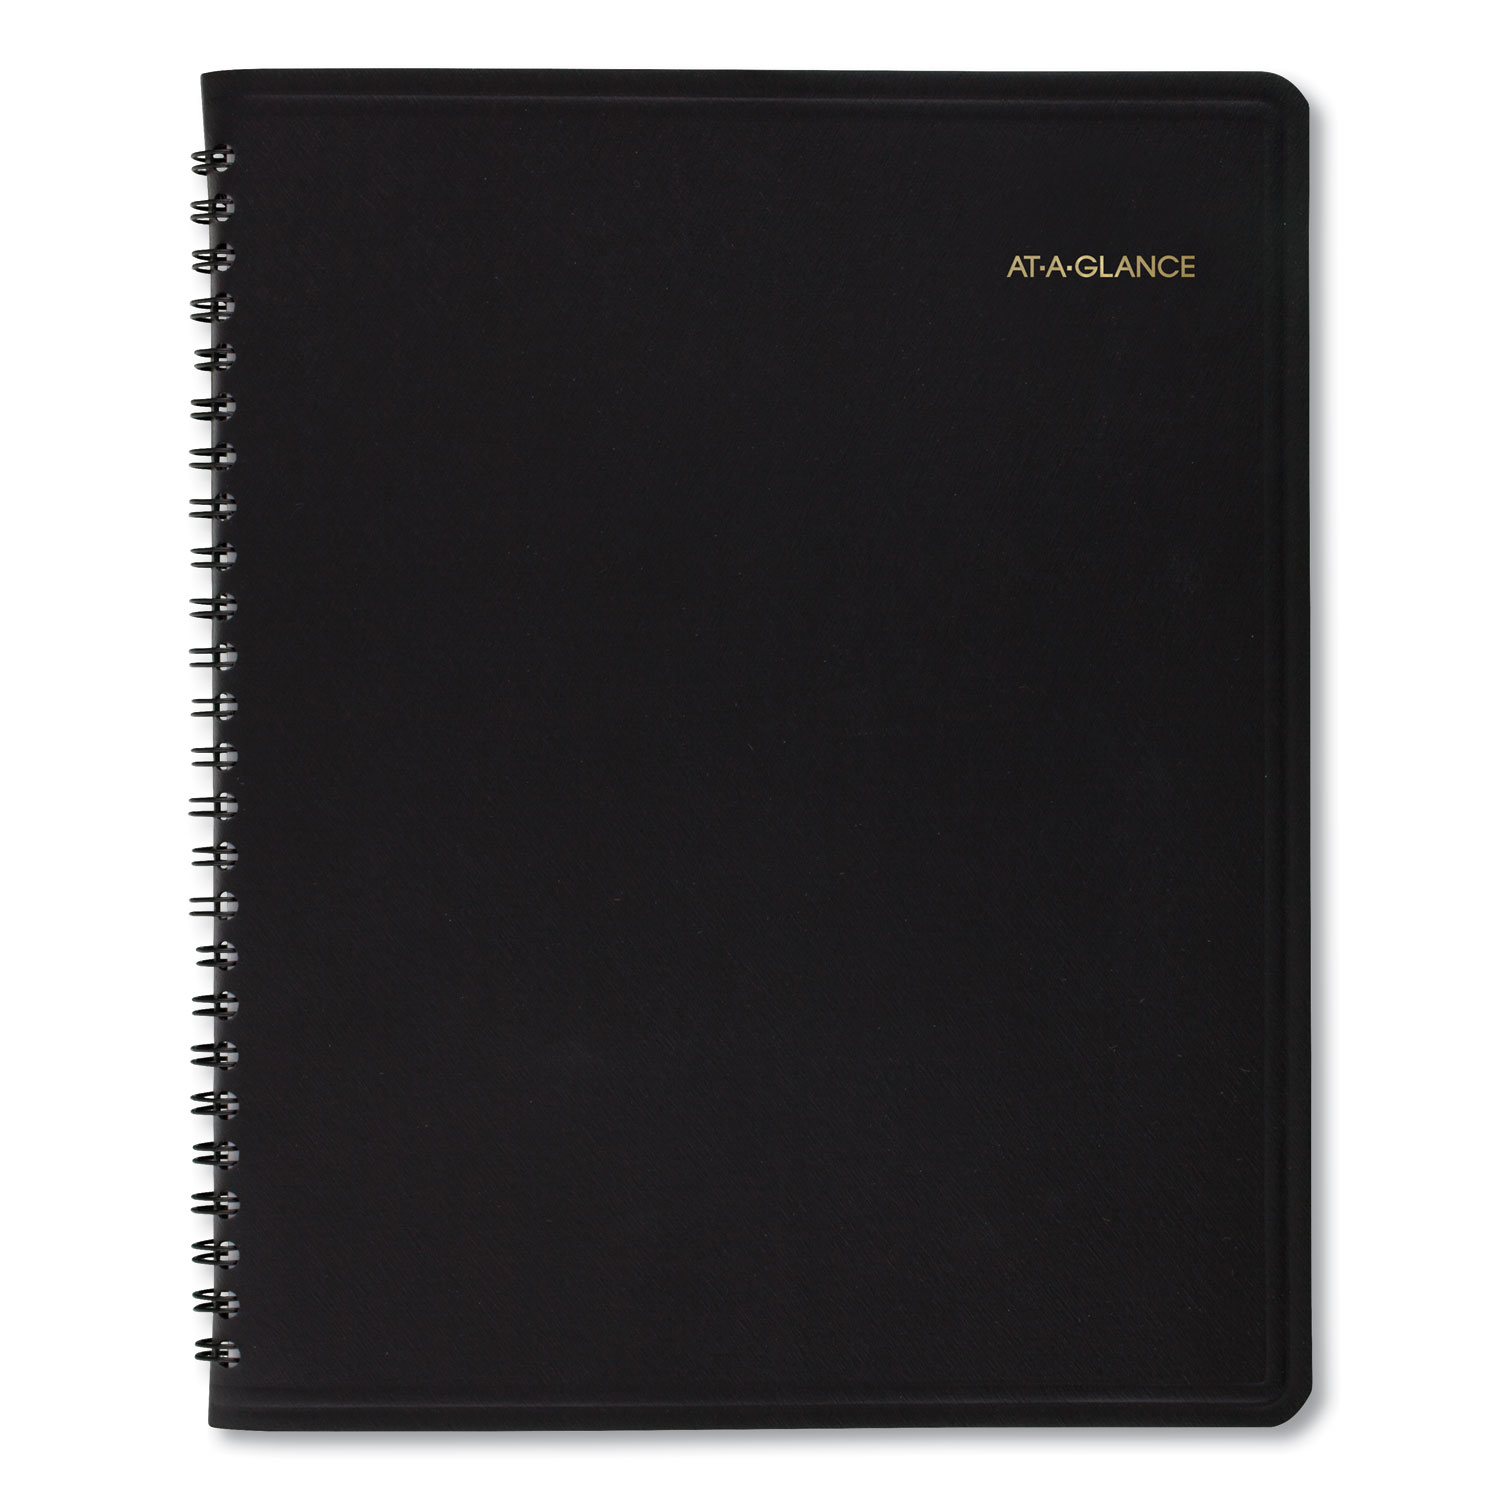  AT-A-GLANCE 7065005 Weekly/Monthly Appointment Book, 8 3/4 x 6 7/8, Black, 2020 (AAG7065005) 